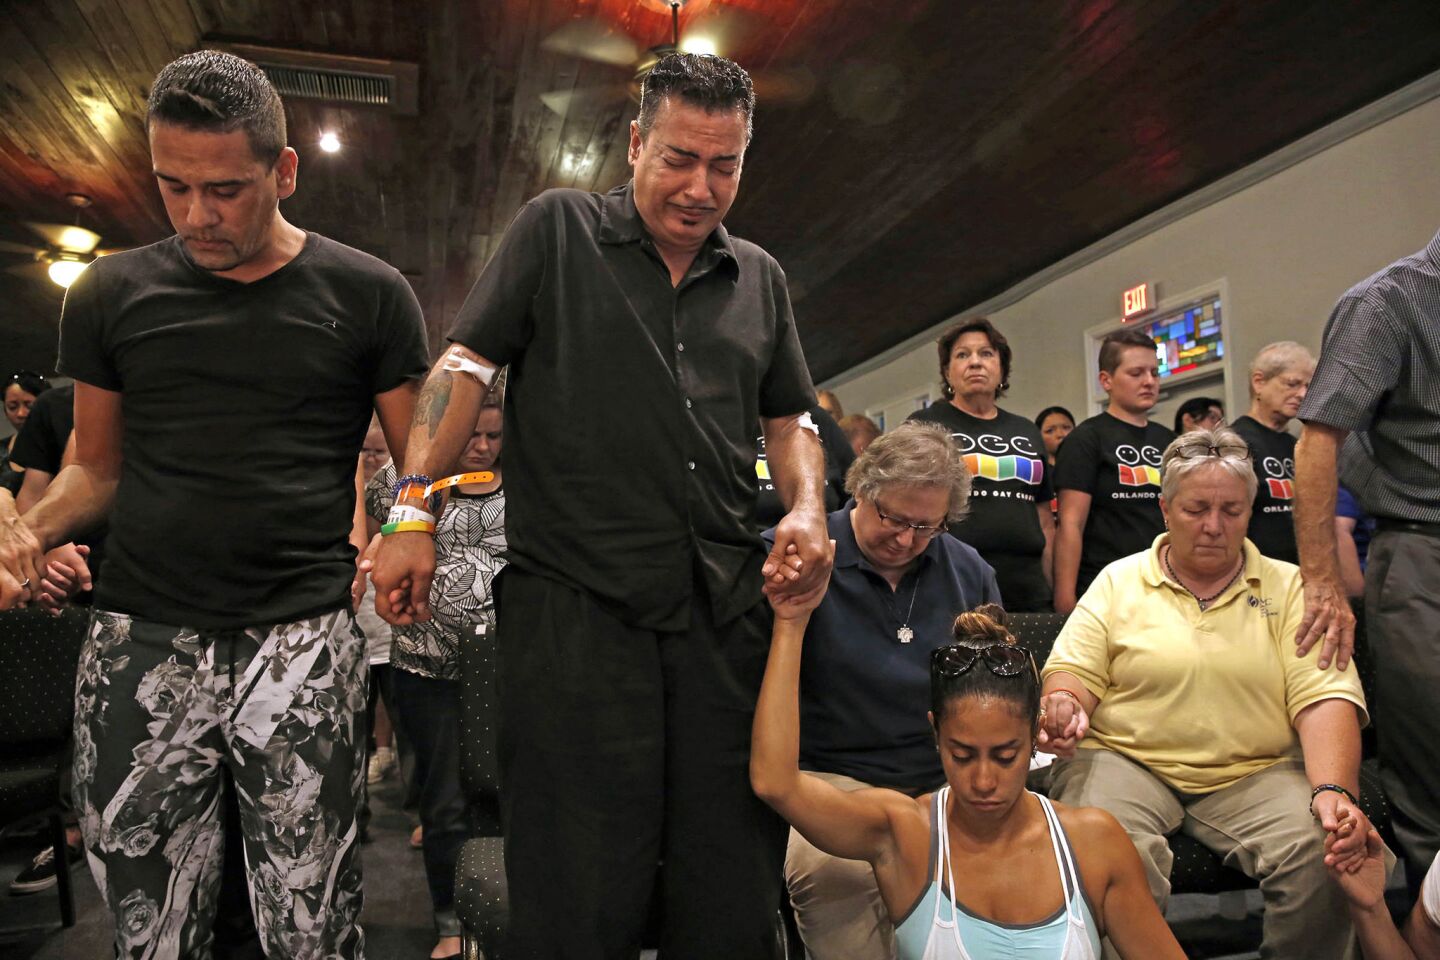 Orlando, second from right, was at the nightclub and trapped for three hours in a bathroom. Orlando and family attend a vigil and church service held at Joy Meropolitan Community Church very close to Pulse nightclub.